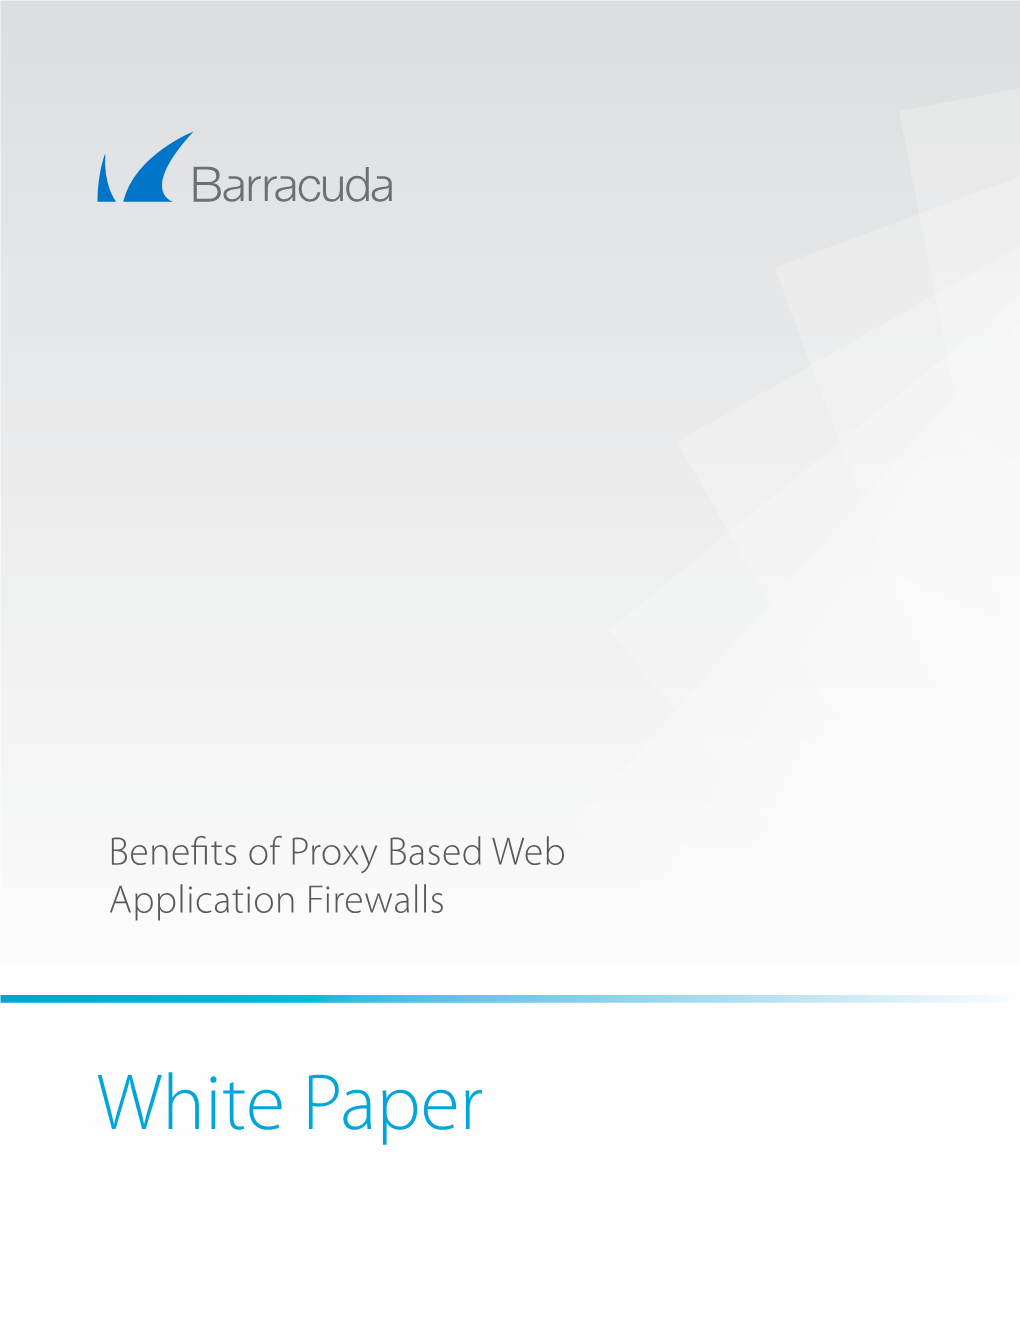 White Paper Barracuda Networks Benefits of Proxy Based Web Application Firewalls